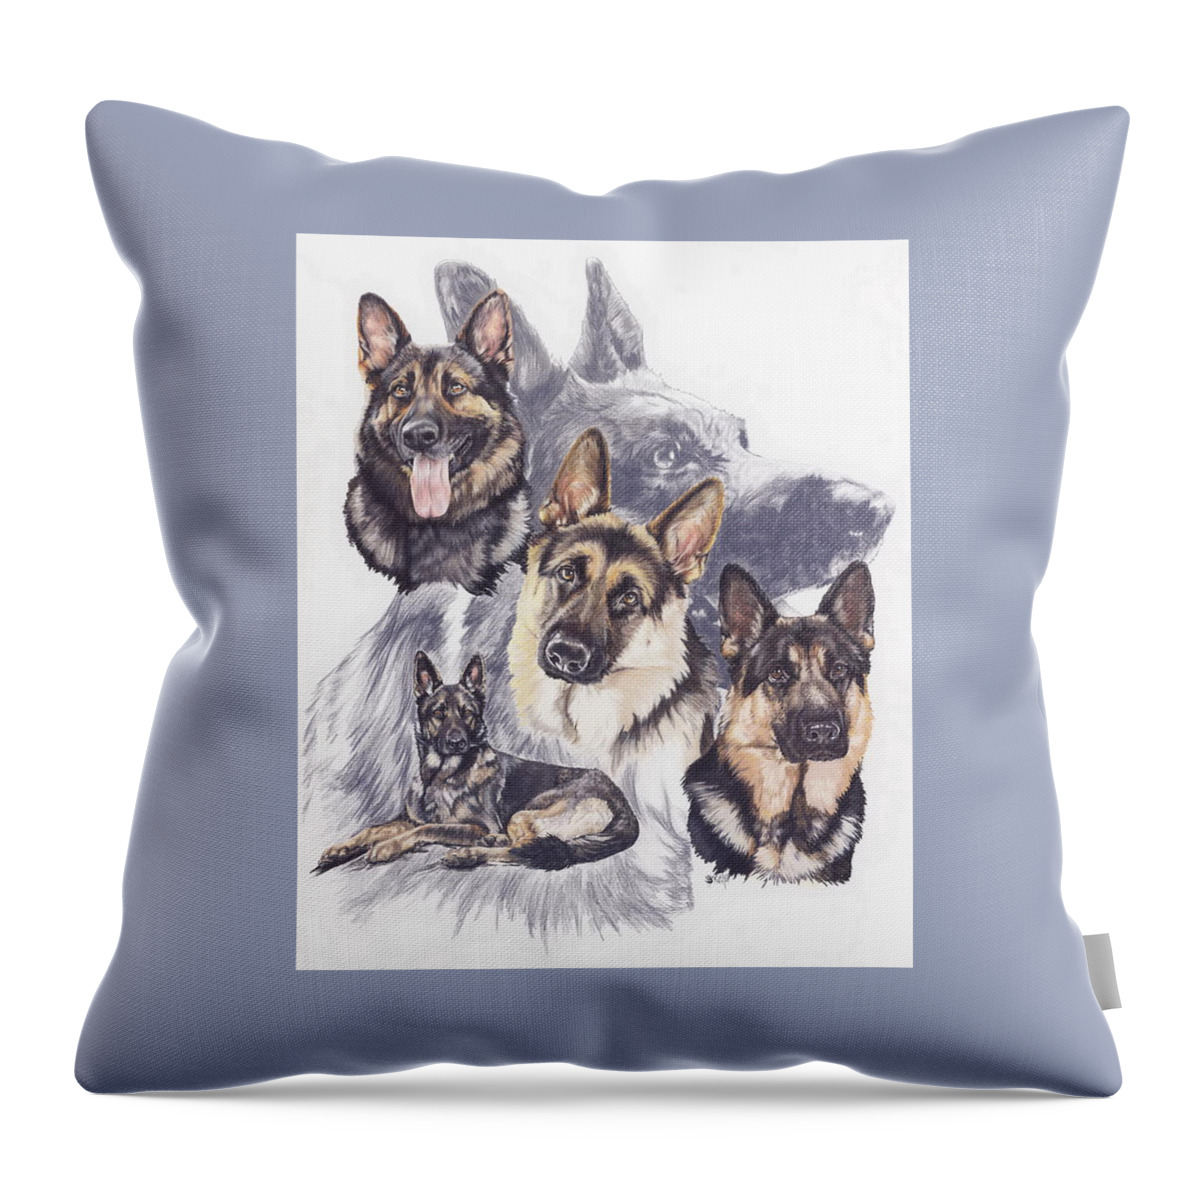 Purebred Throw Pillow featuring the mixed media German Shepherd Medley by Barbara Keith